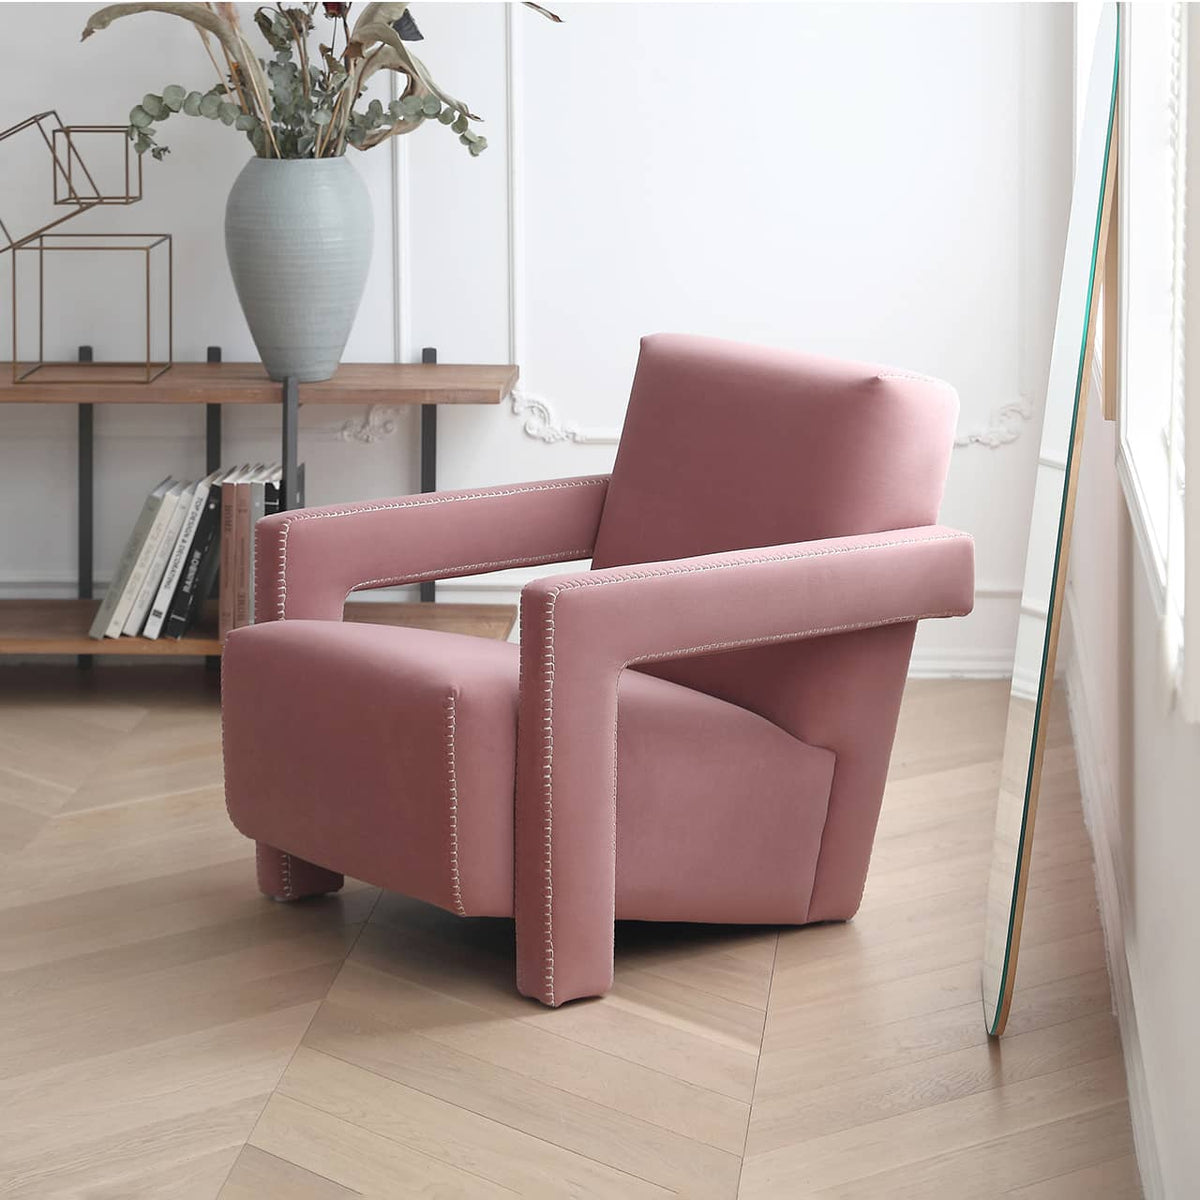 Luxurious Pink Pine Suede Chair - Stylish and Comfortable Seating my-356